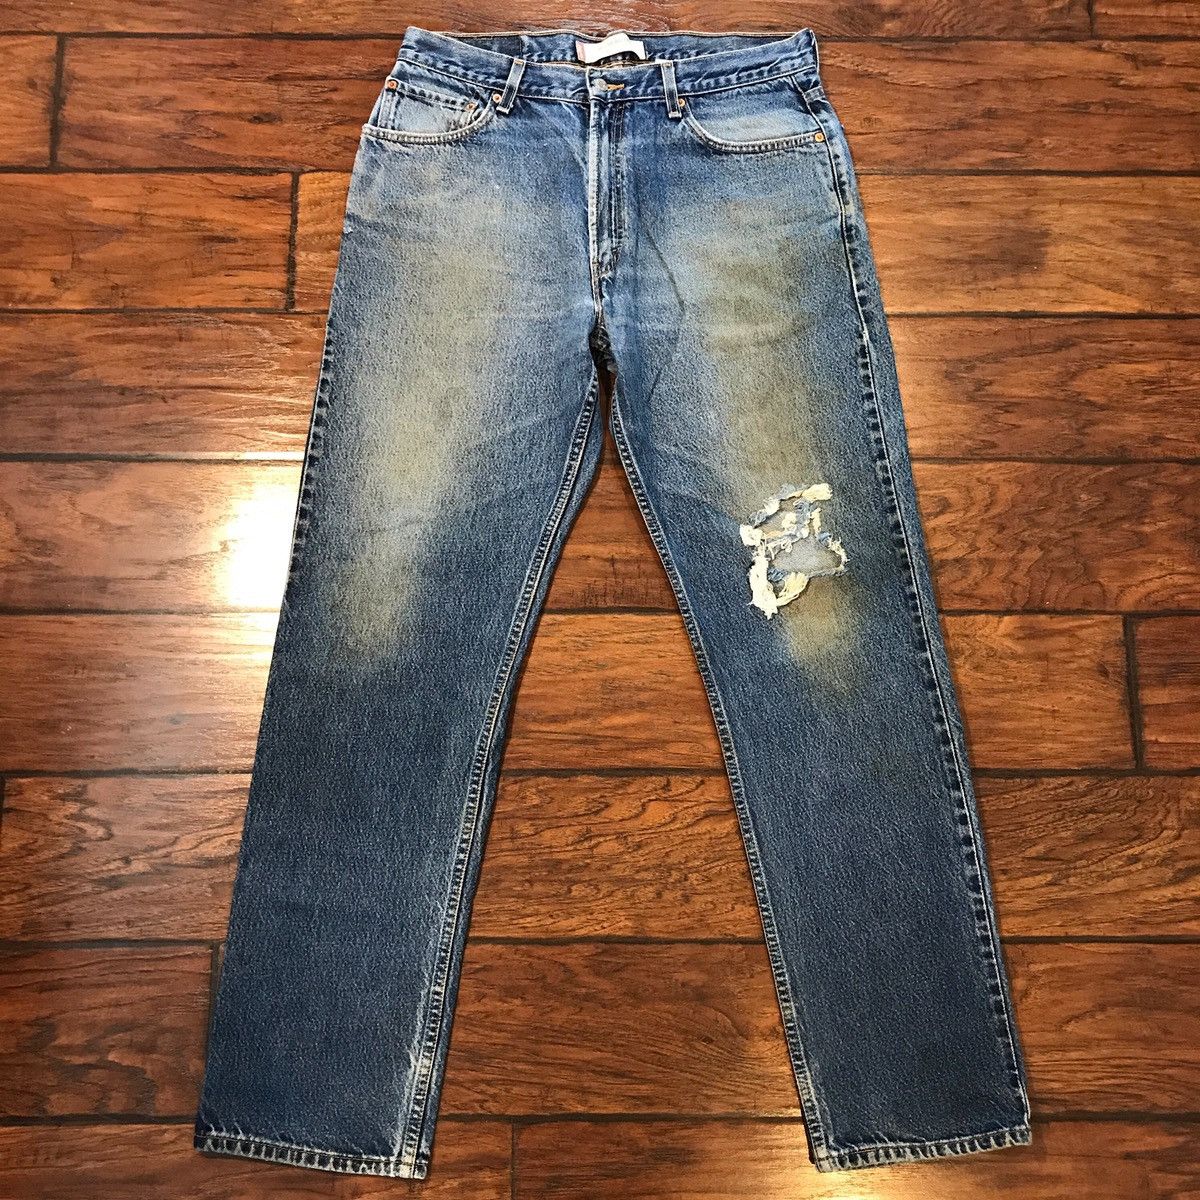 Vintage Vintage 1990’s Levi’s 505 Heavily Distressed Faded Jeans Size US 34 / EU 50 - 1 Preview